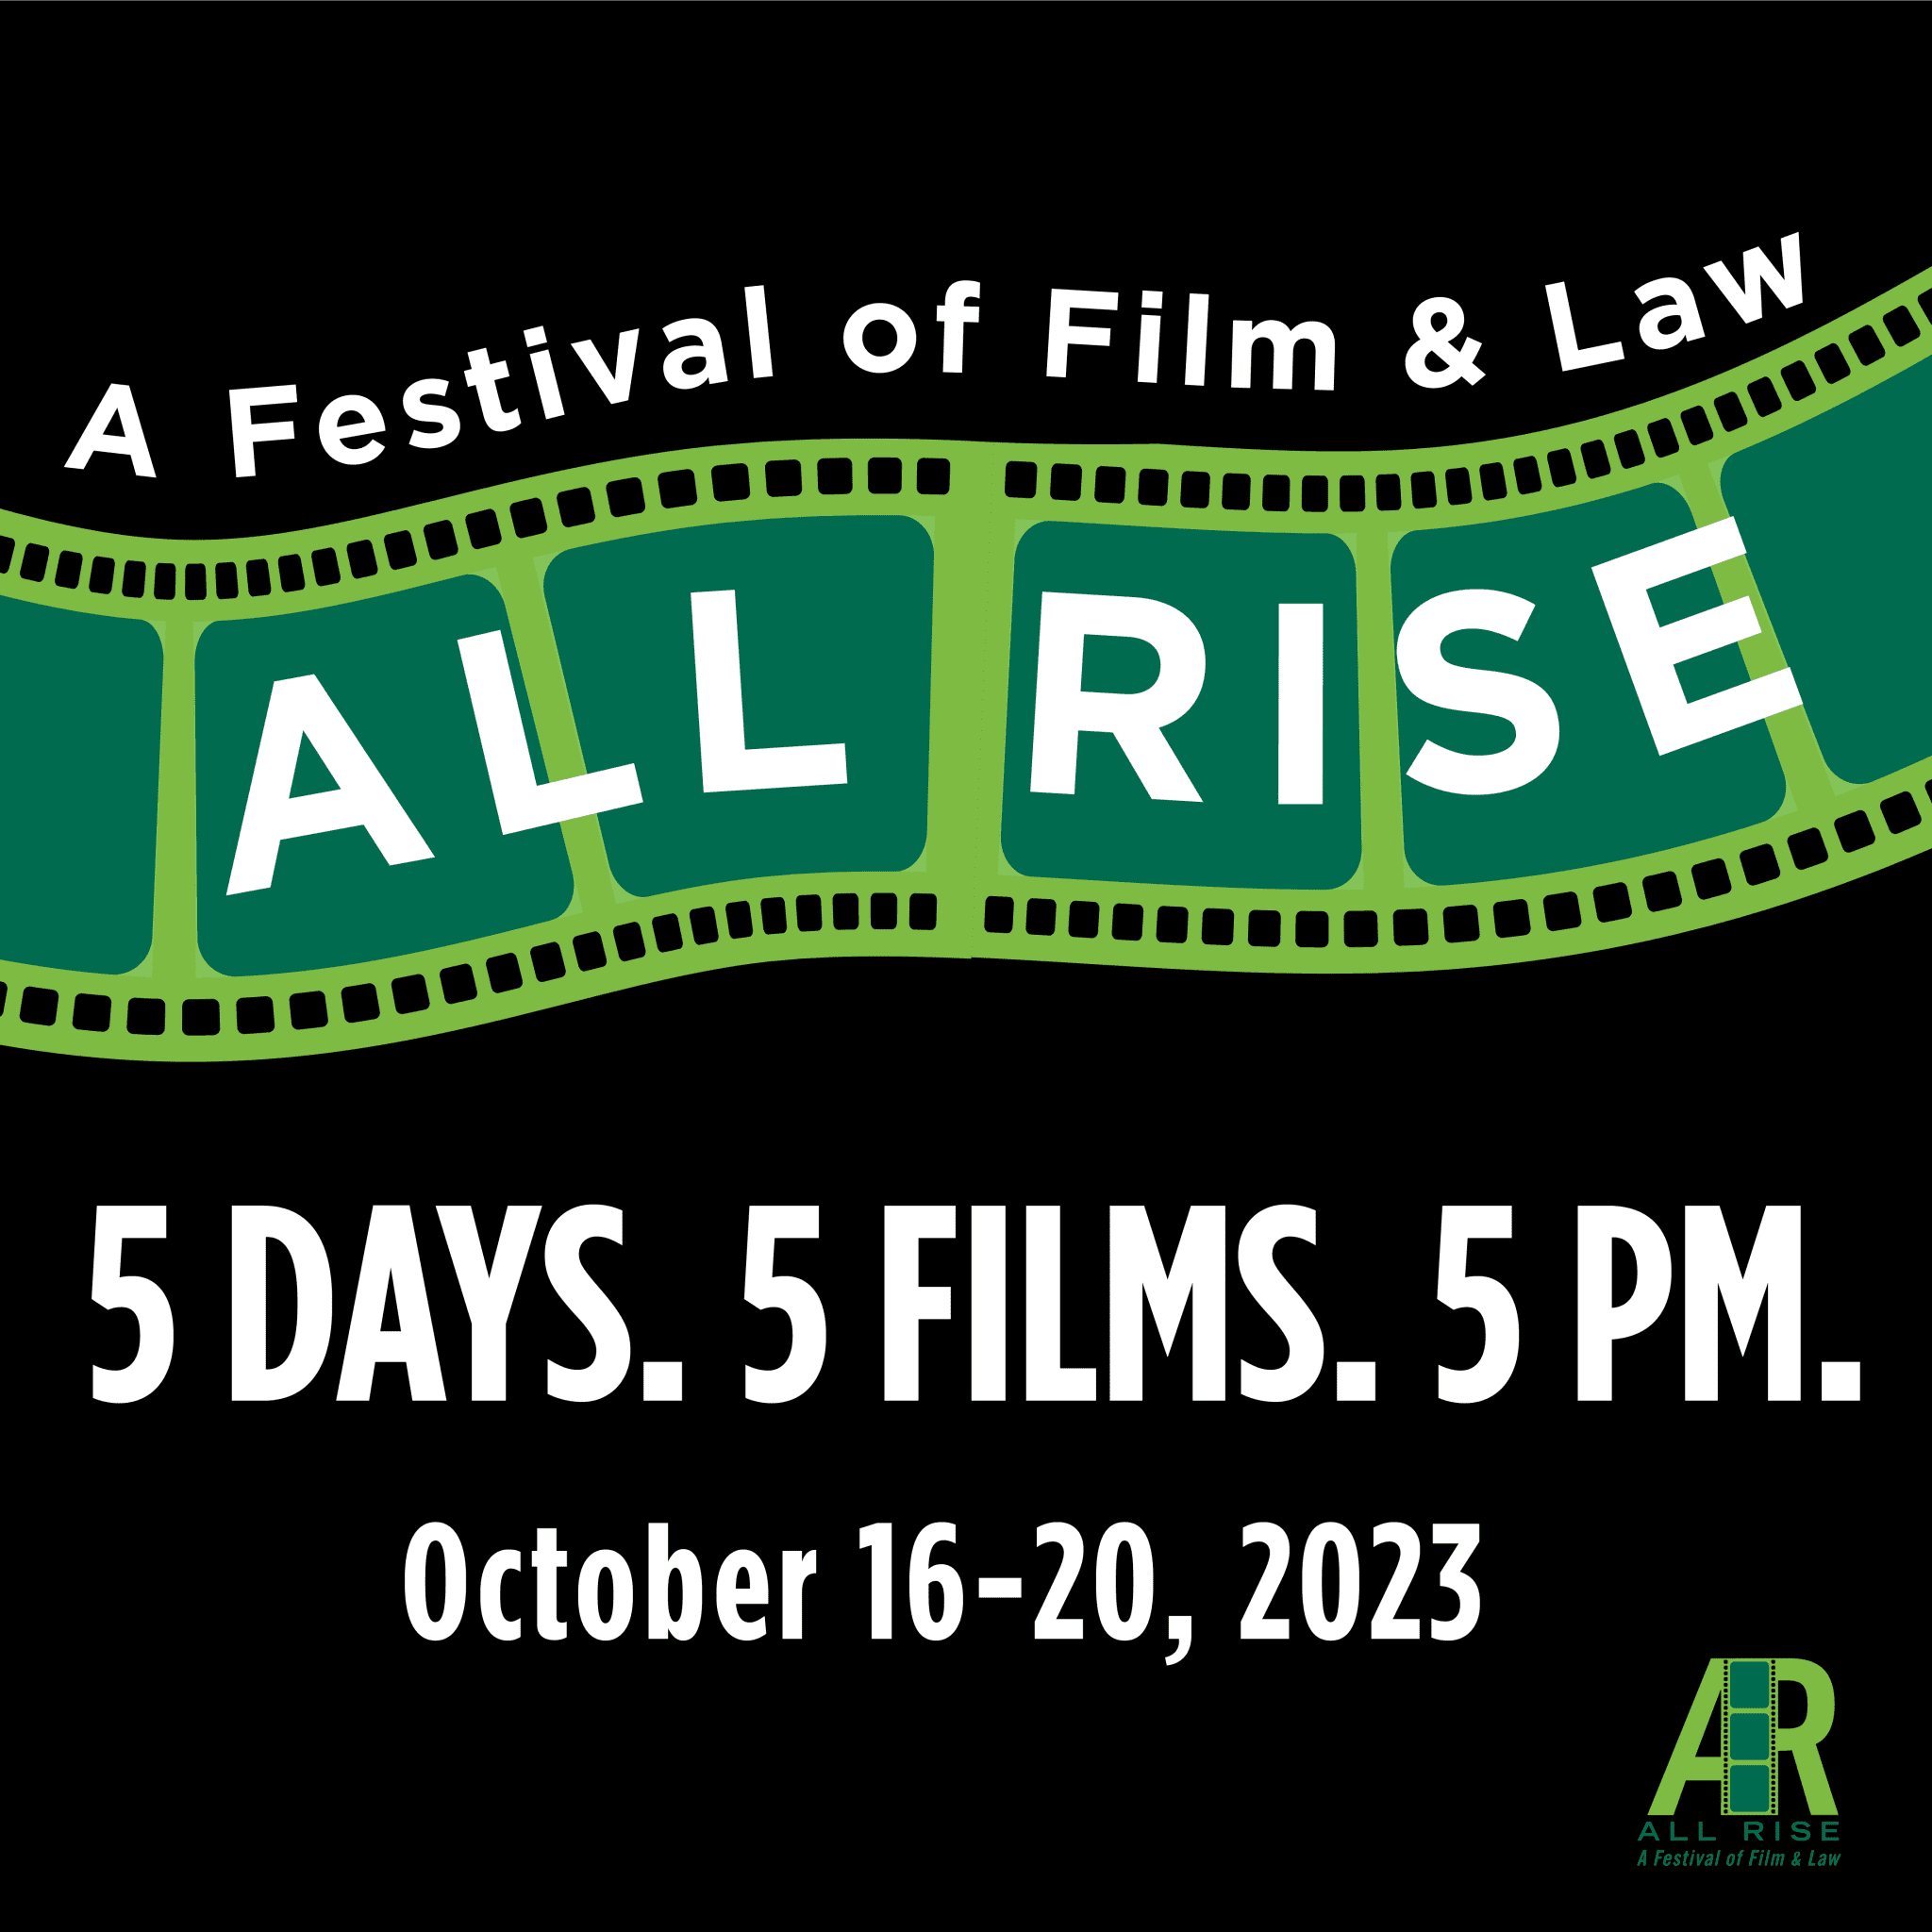 All Rise Film Festival Cleveland State University